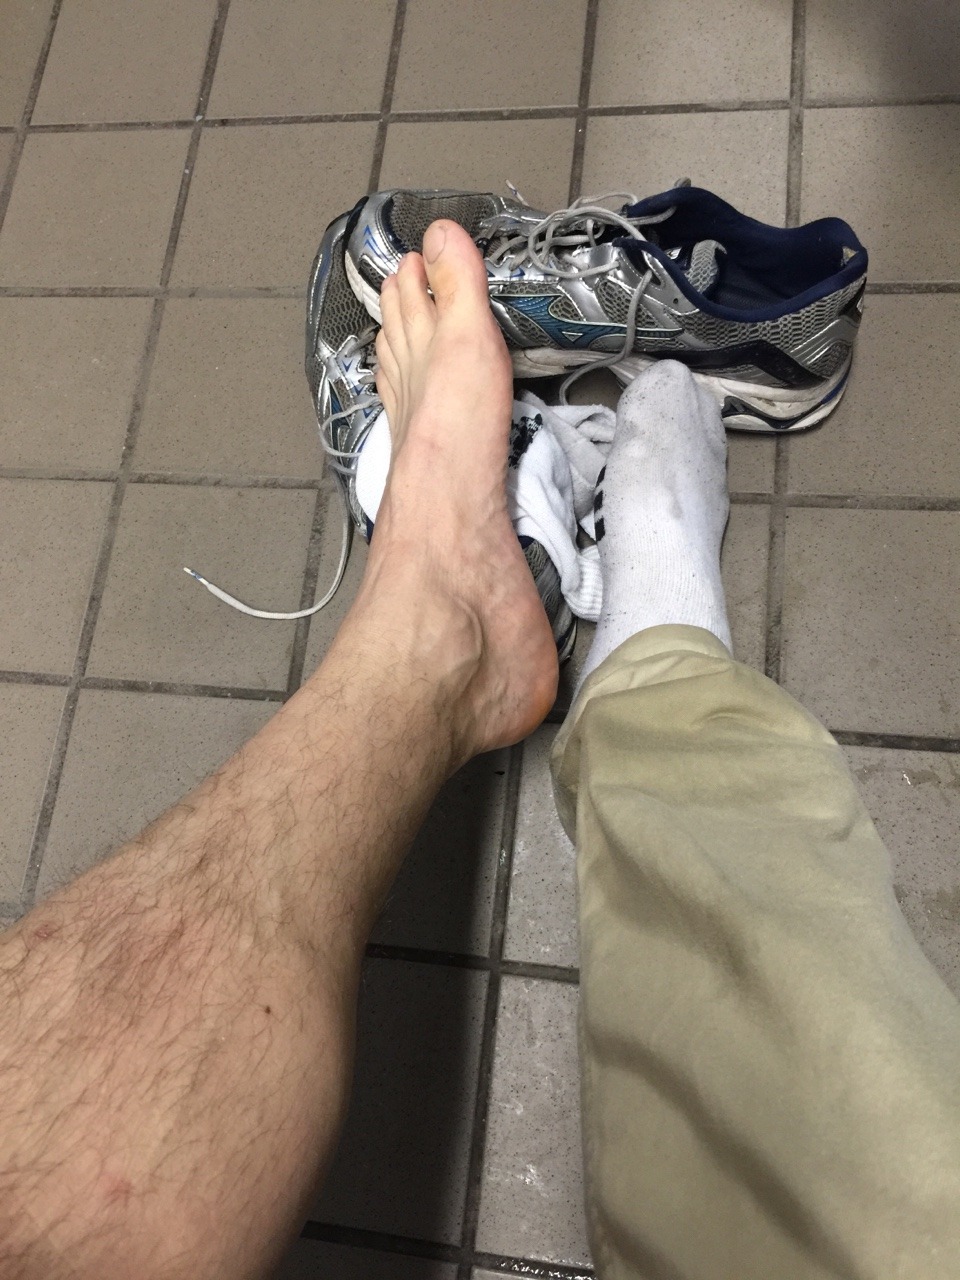 size15cashmaster:Cold, wet day in NYC. Could really use a faggot’s mouth to warm